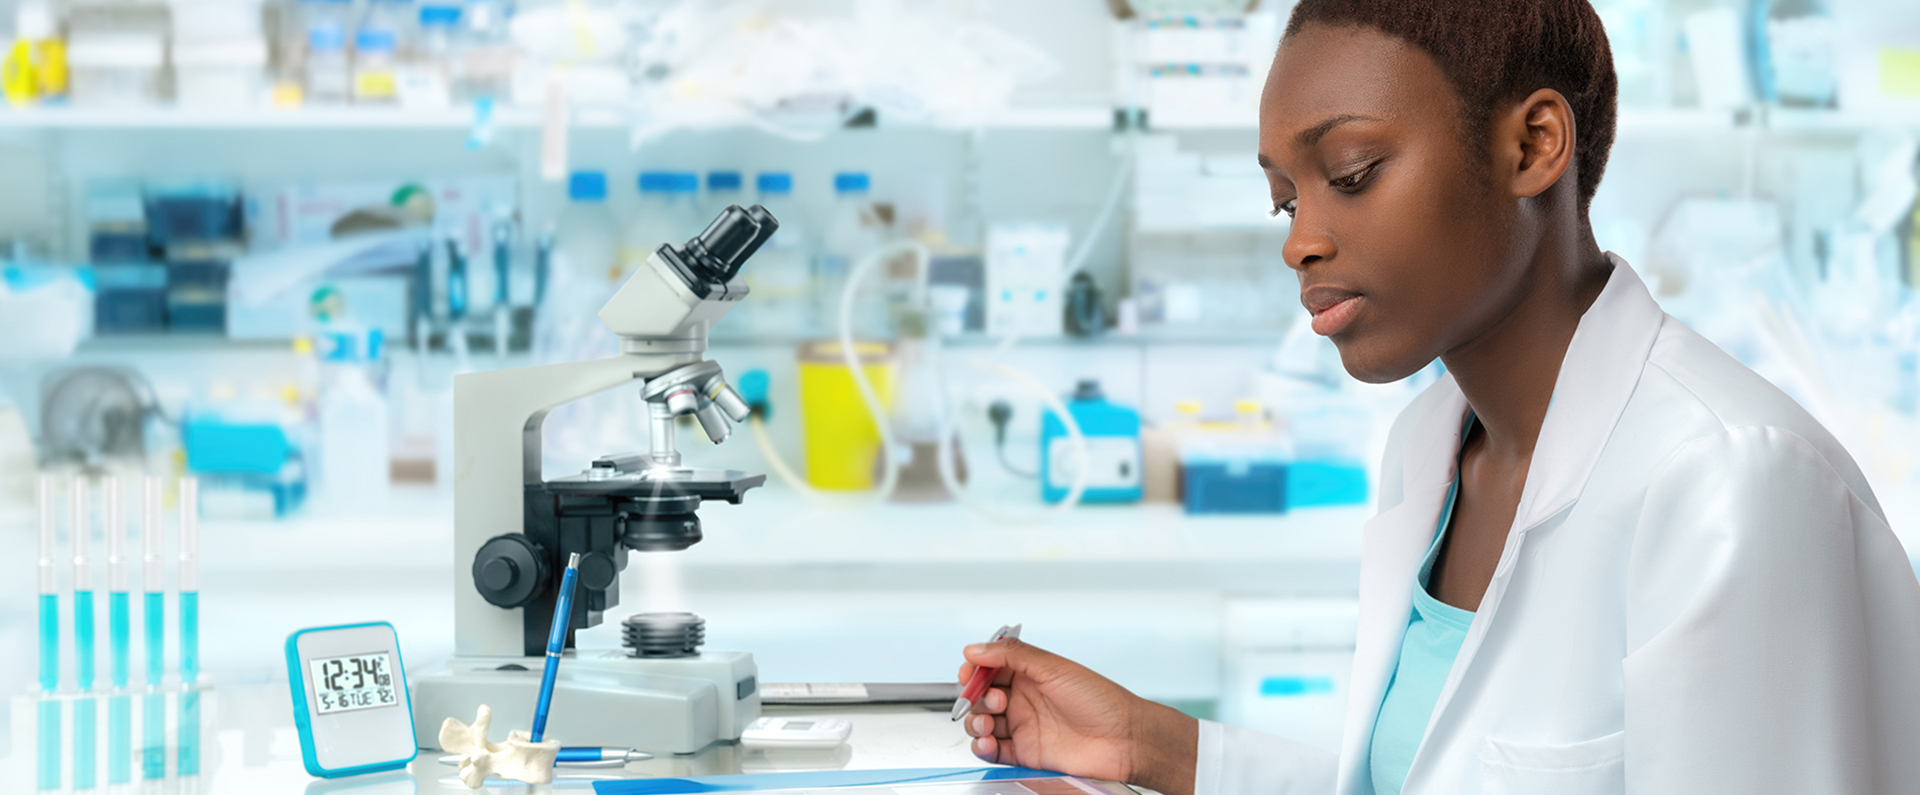 Female in a white lab coat sitting in front of a microscope in a laboratory